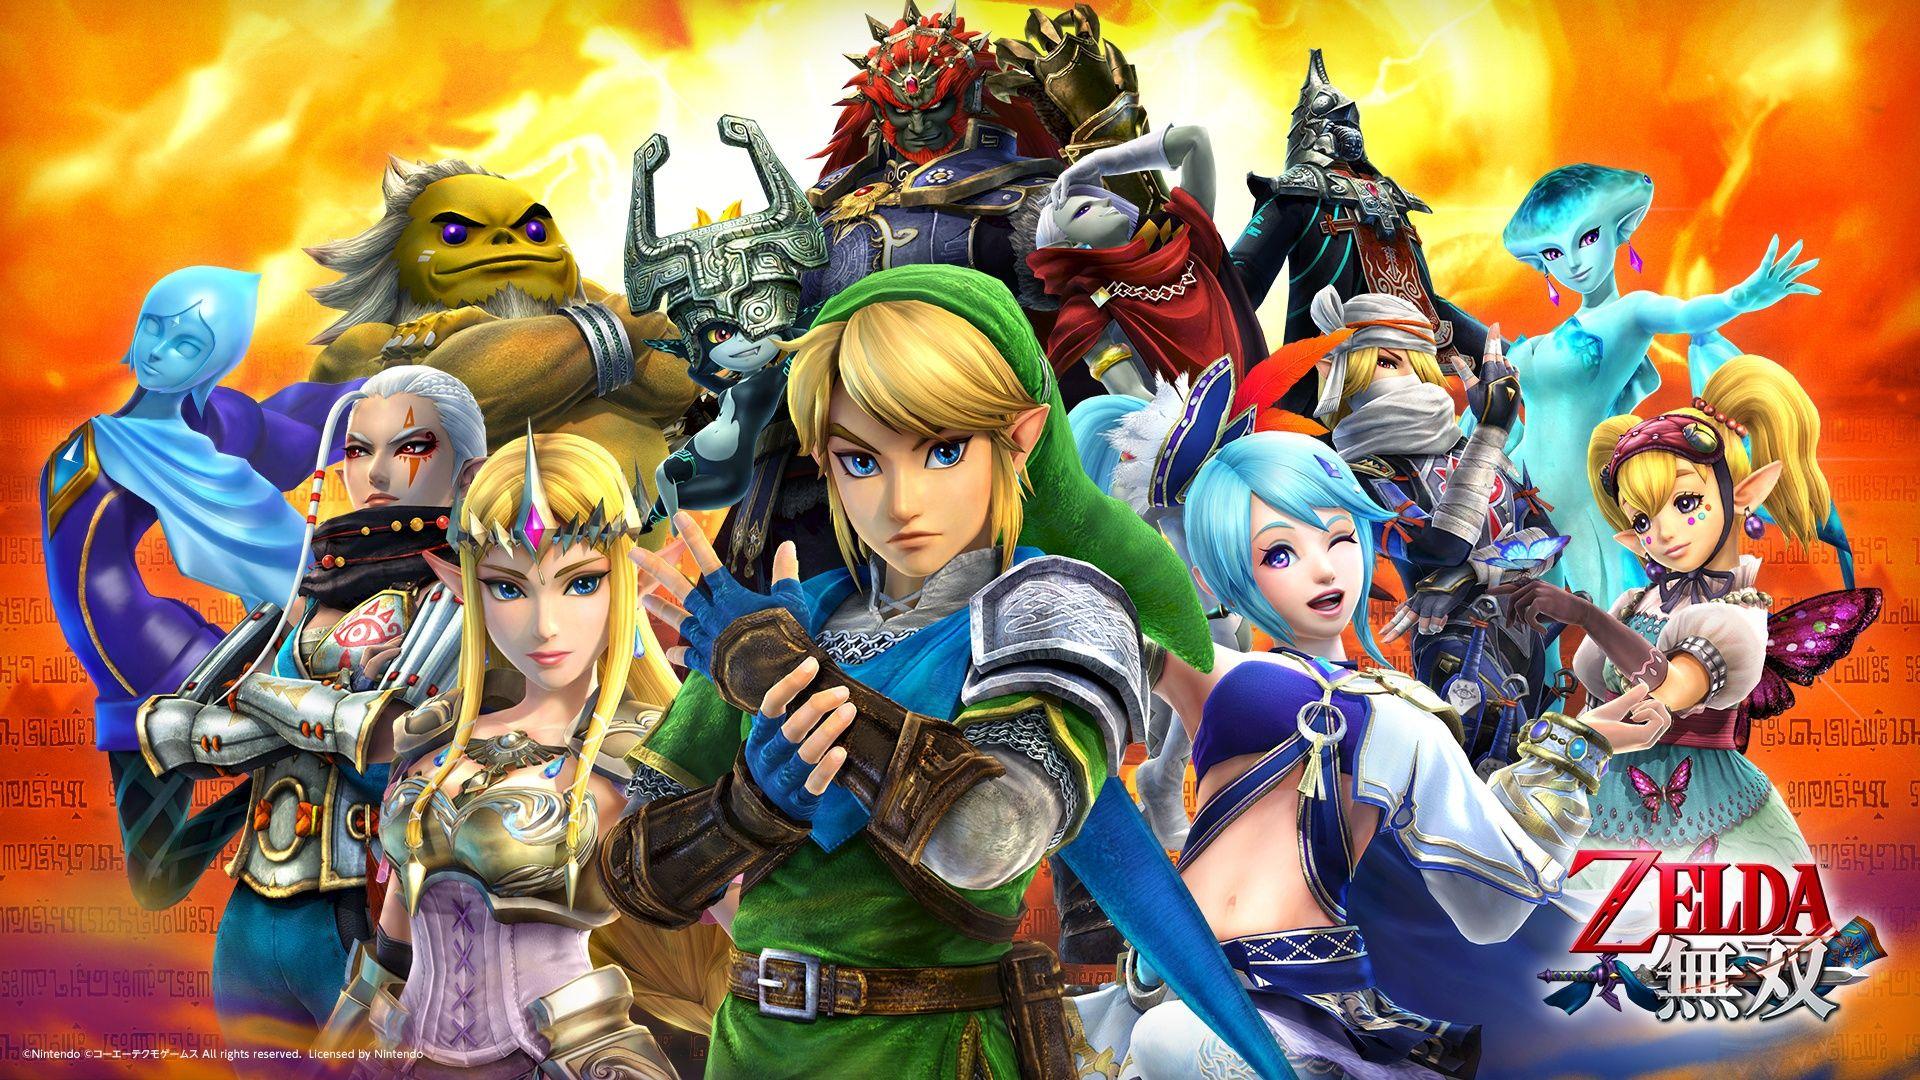 Koei Tecmo Releases Awesome Hyrule Warriors Wallpaper to Celebrate